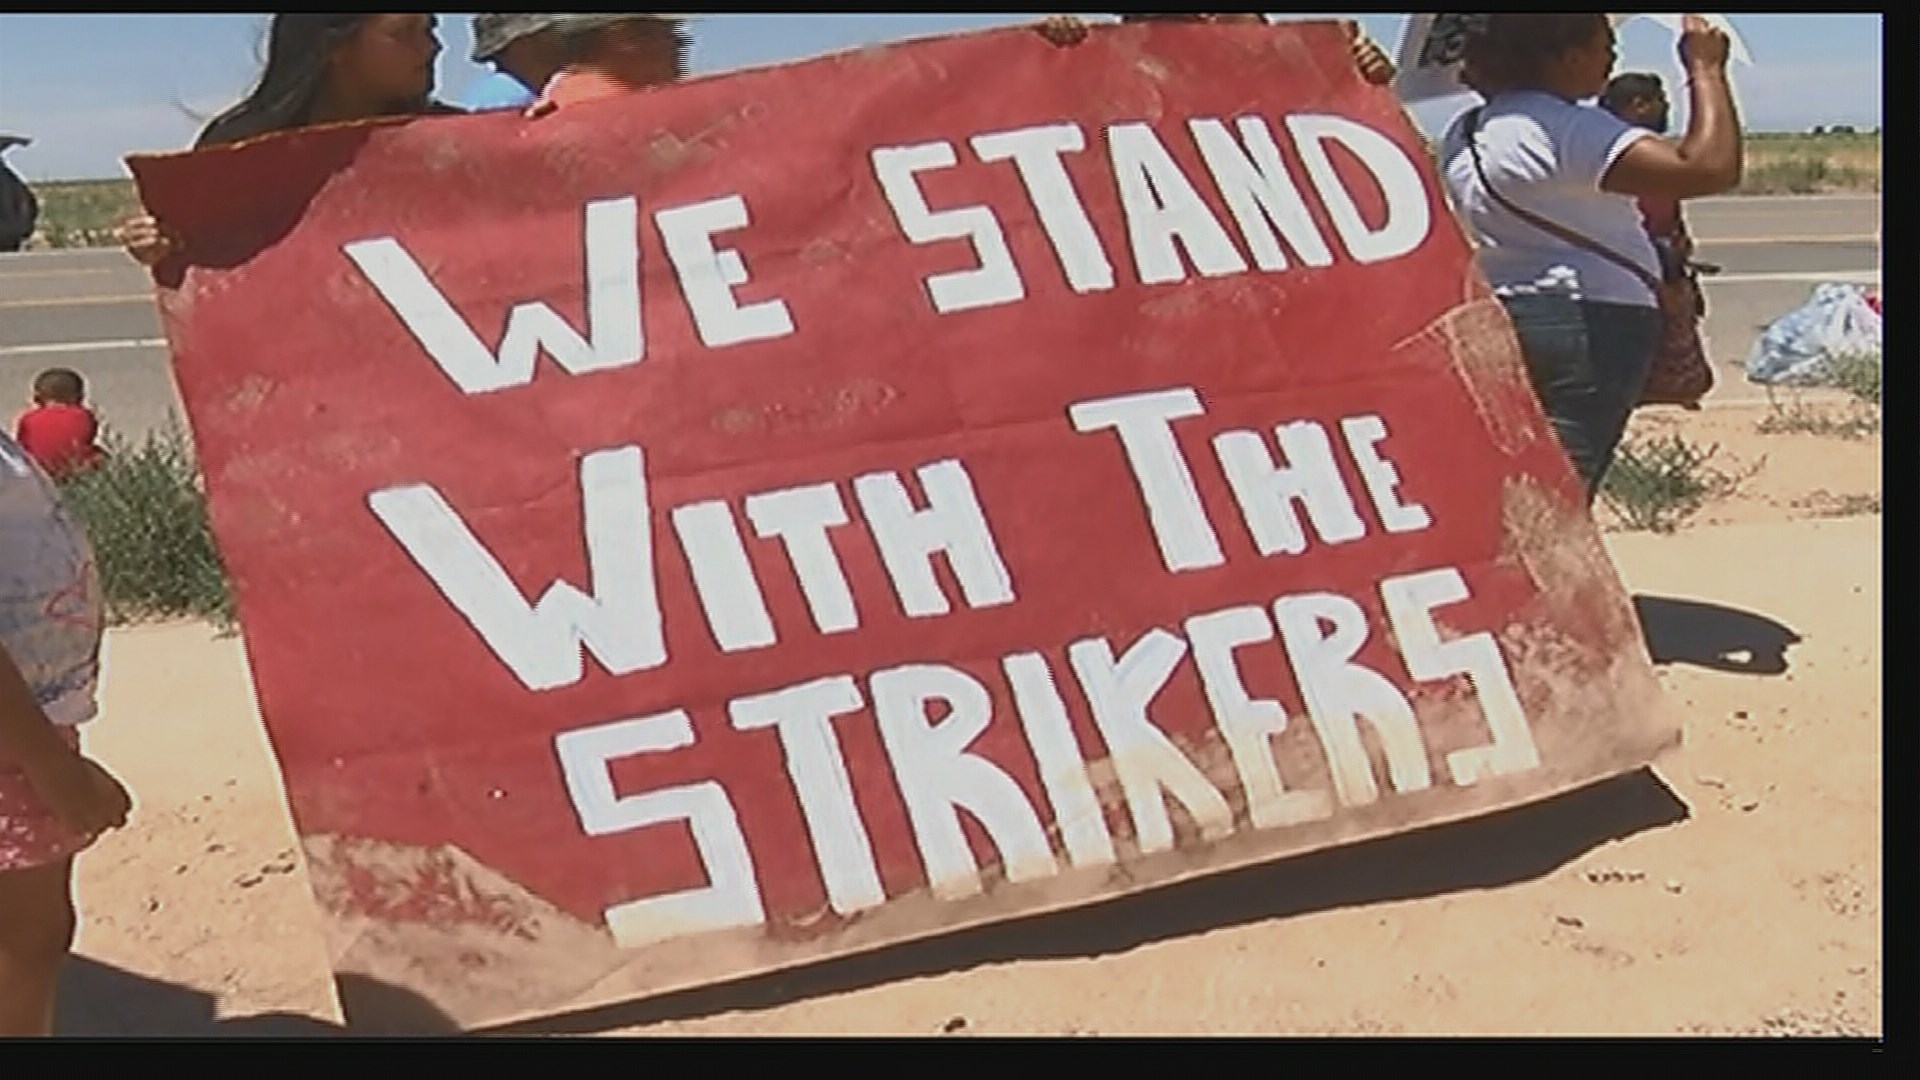 200 detainees stage hunger strike at Eloy Detention Center - Arizona's Family